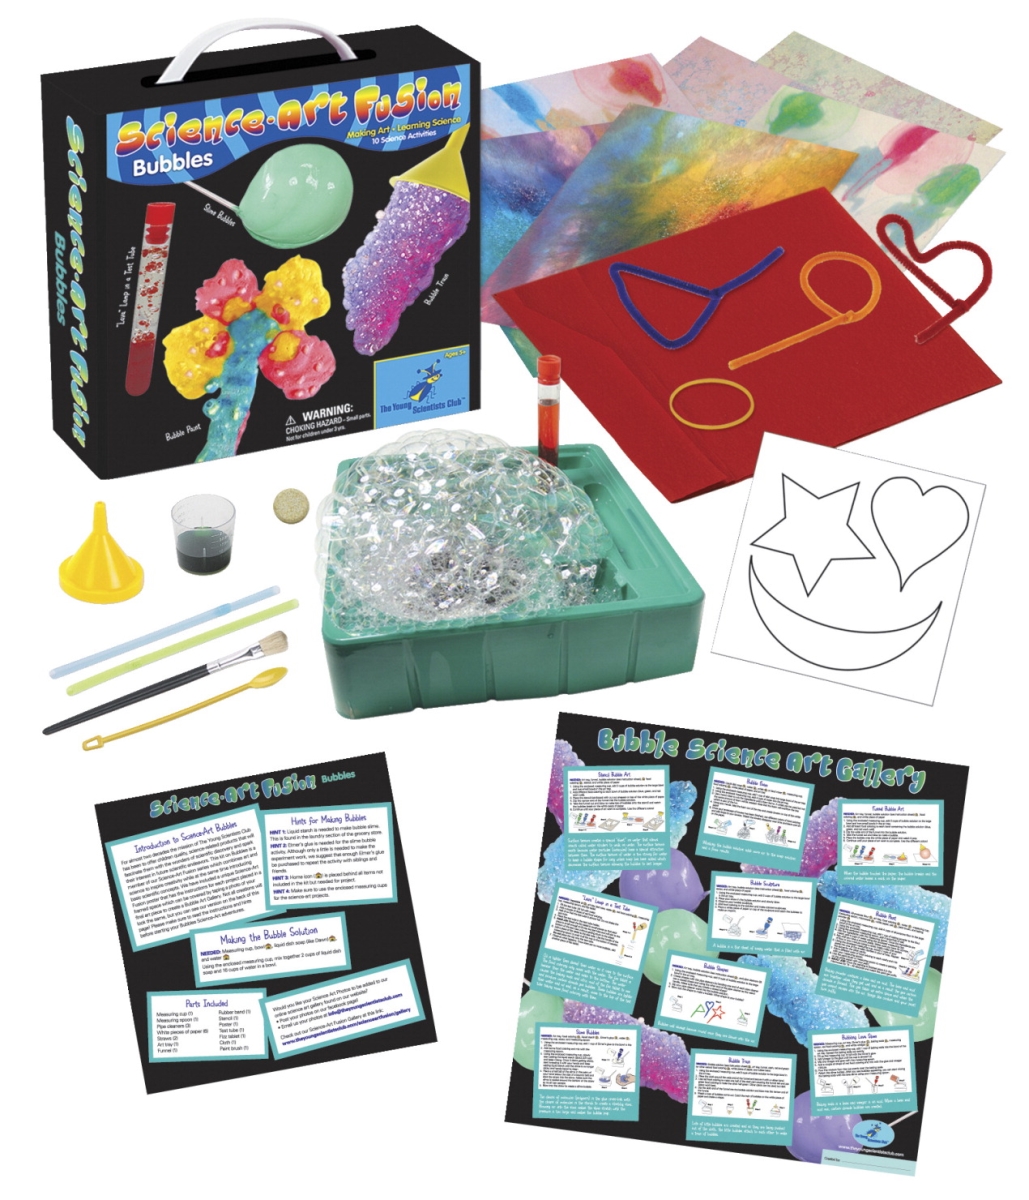 Young Scientists Club 1556794 Science-art Fusion Bubbles Kit